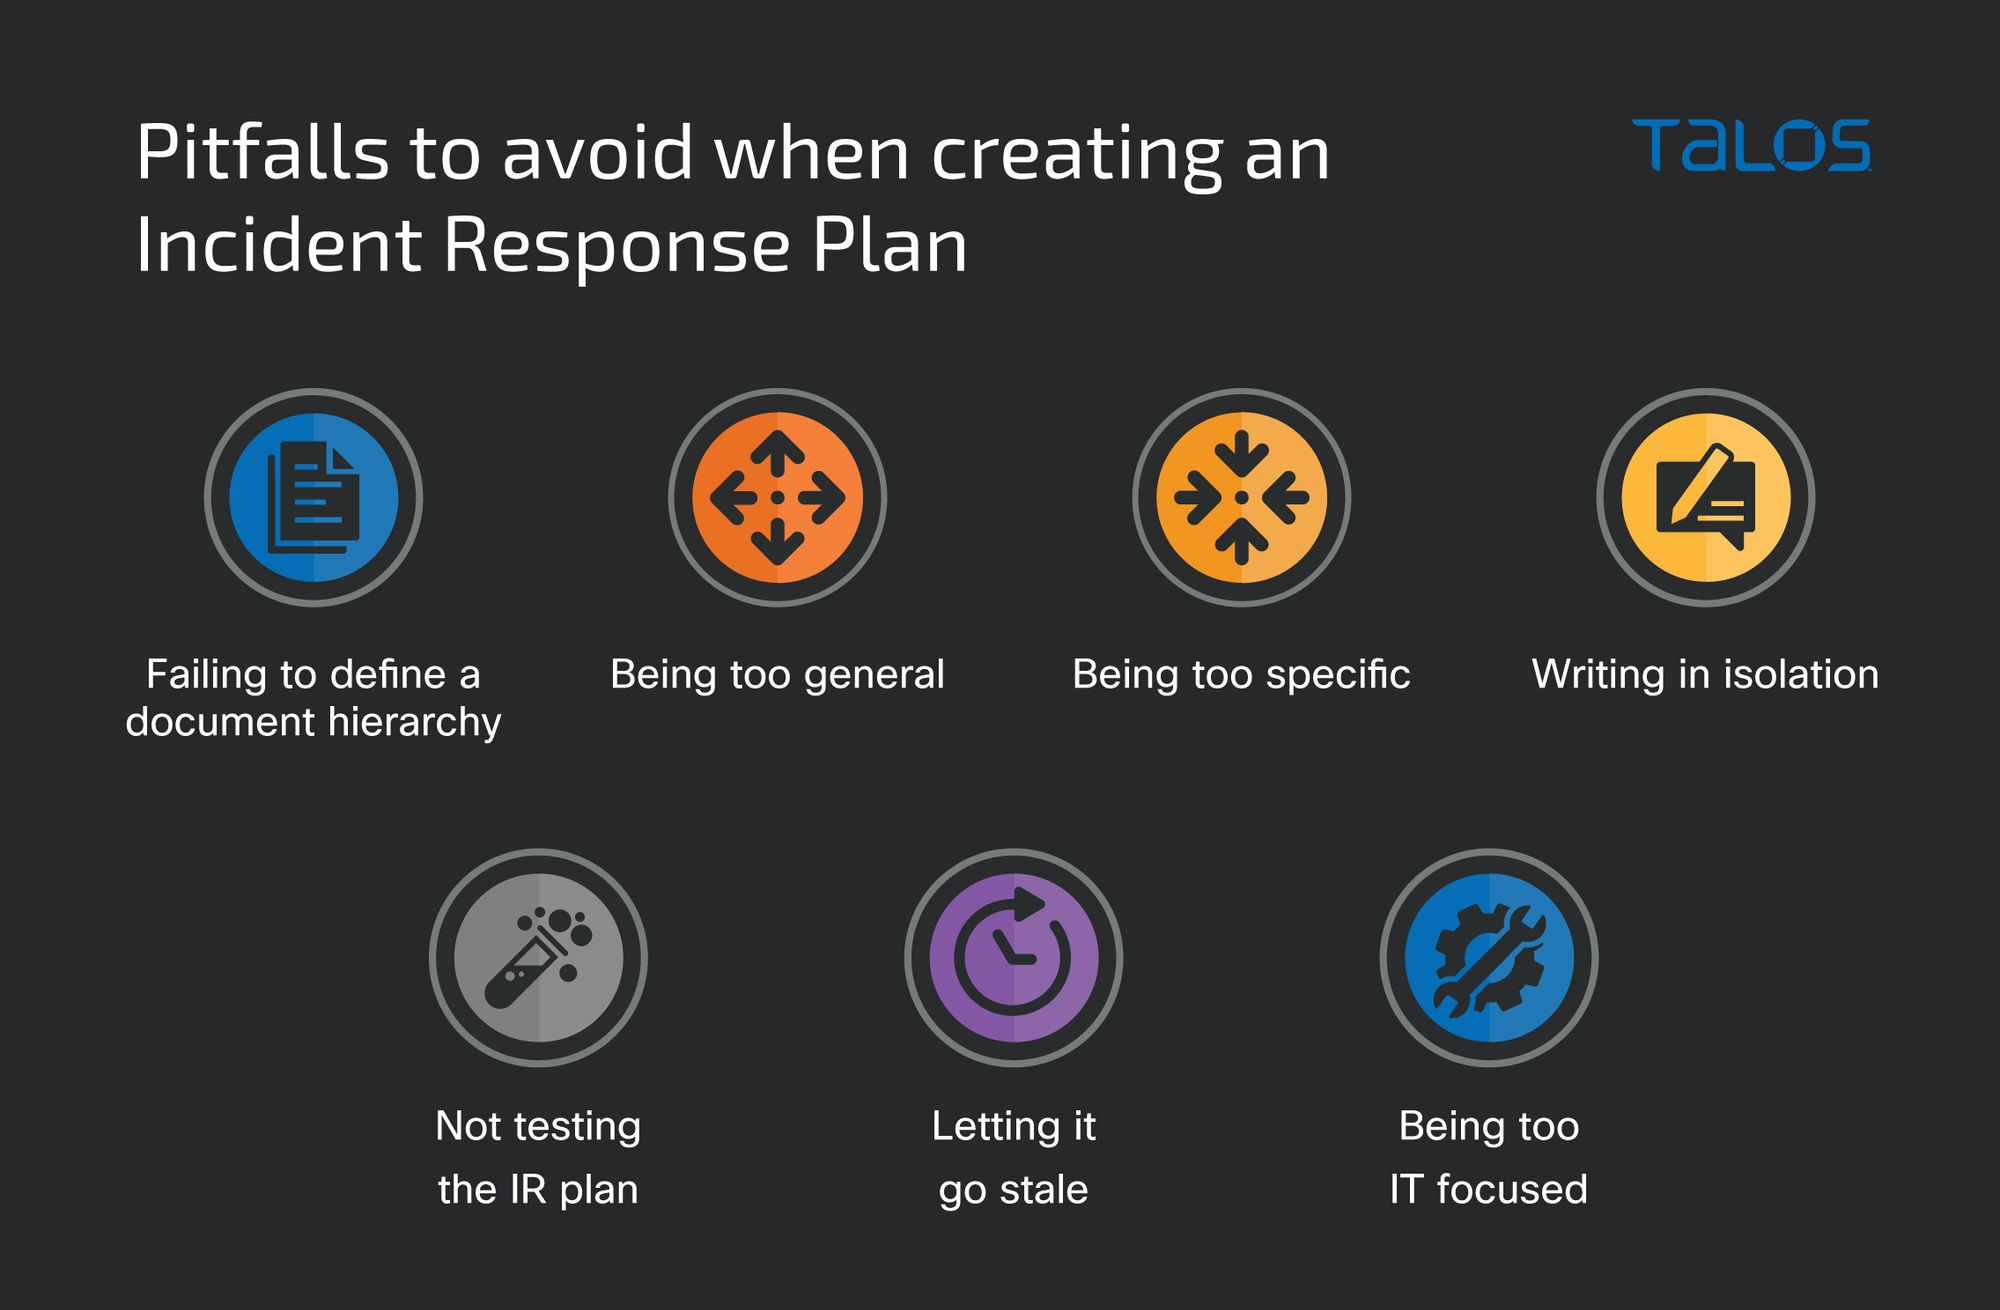 7 common mistakes companies make when creating an incident response plan and how to avoid them